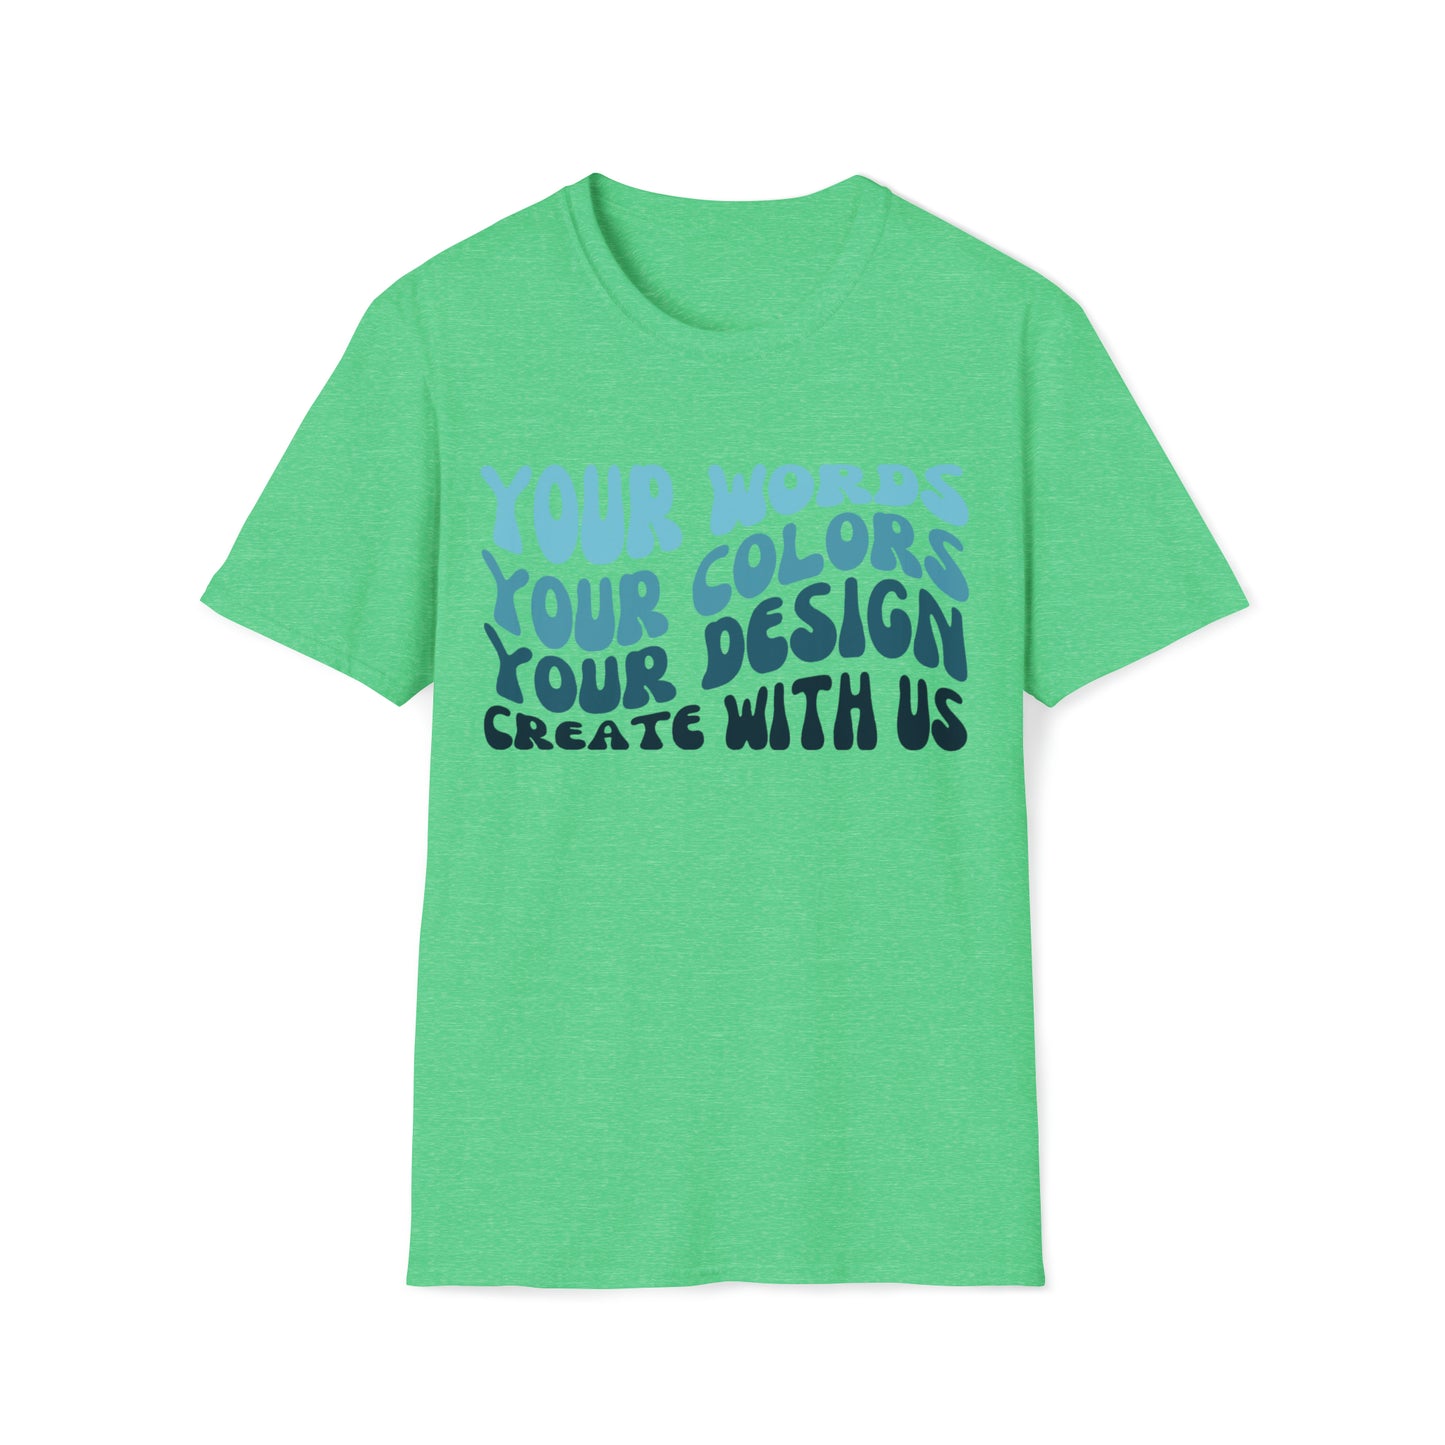 Yours Words, Your Colors, Your Design, Create With Us -  Unisex Softstyle T-Shirt